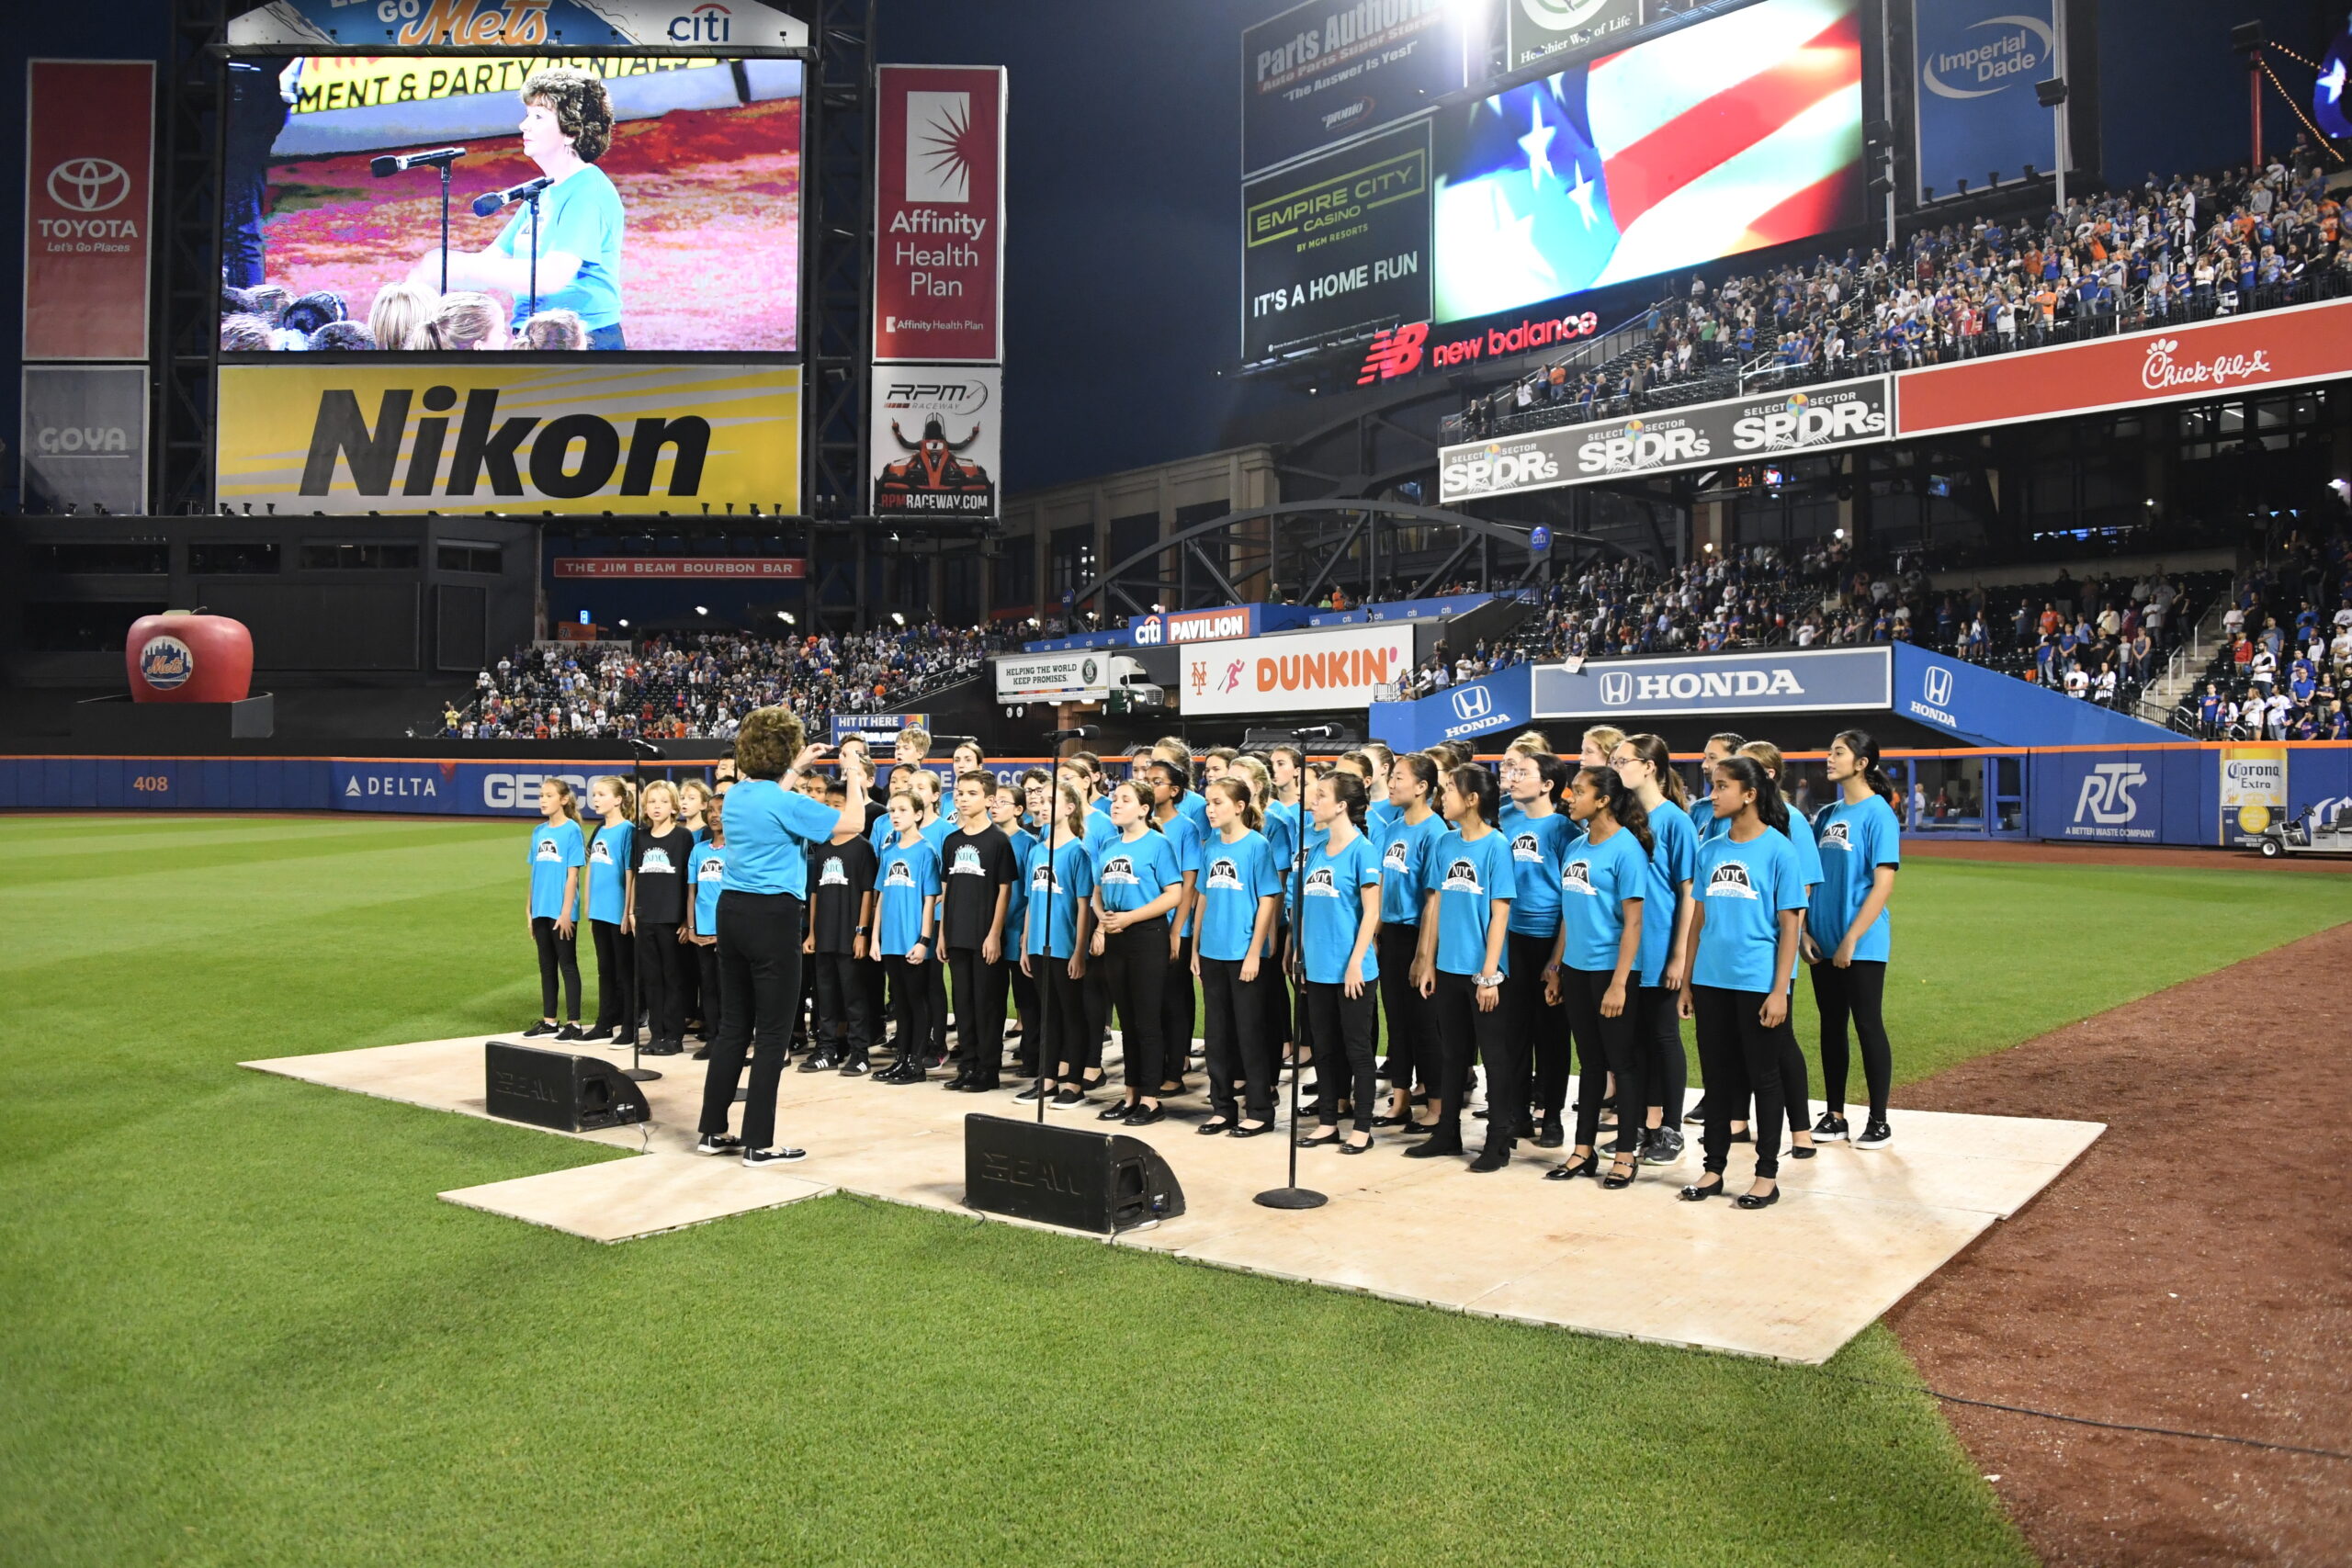 NJYC at Mets